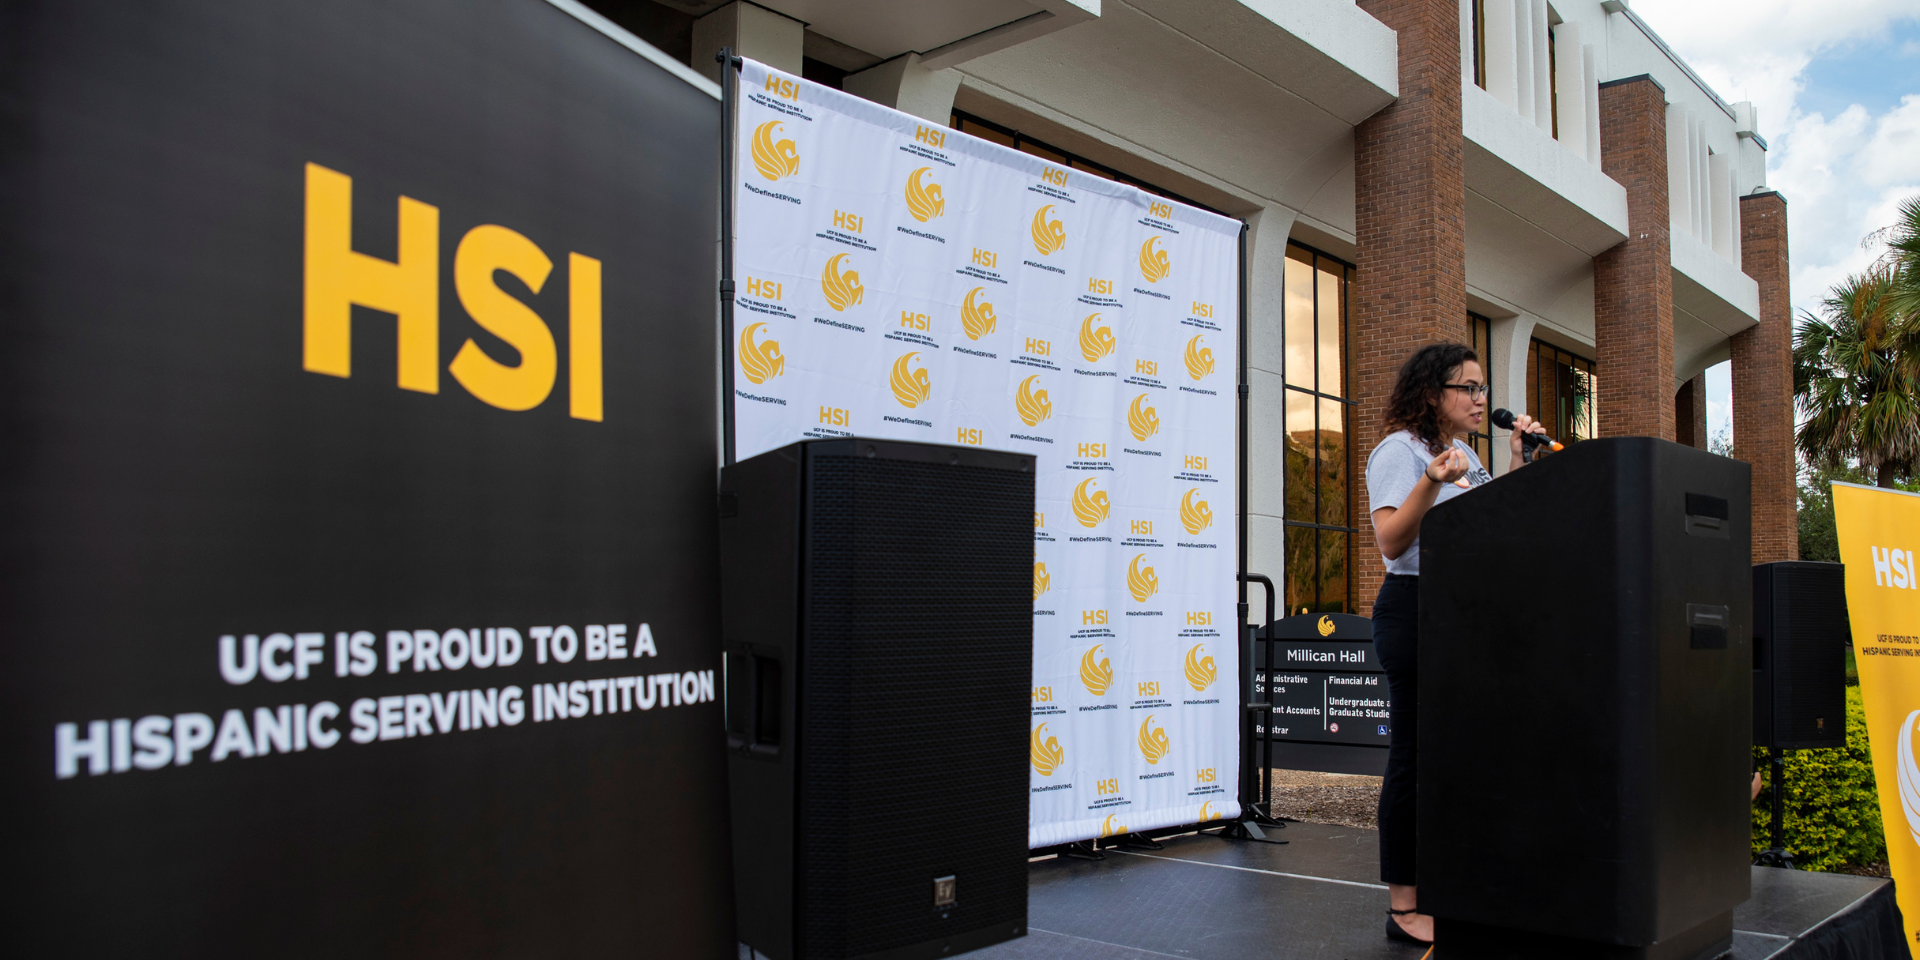 image of the HSI banner and person speaking at a podium